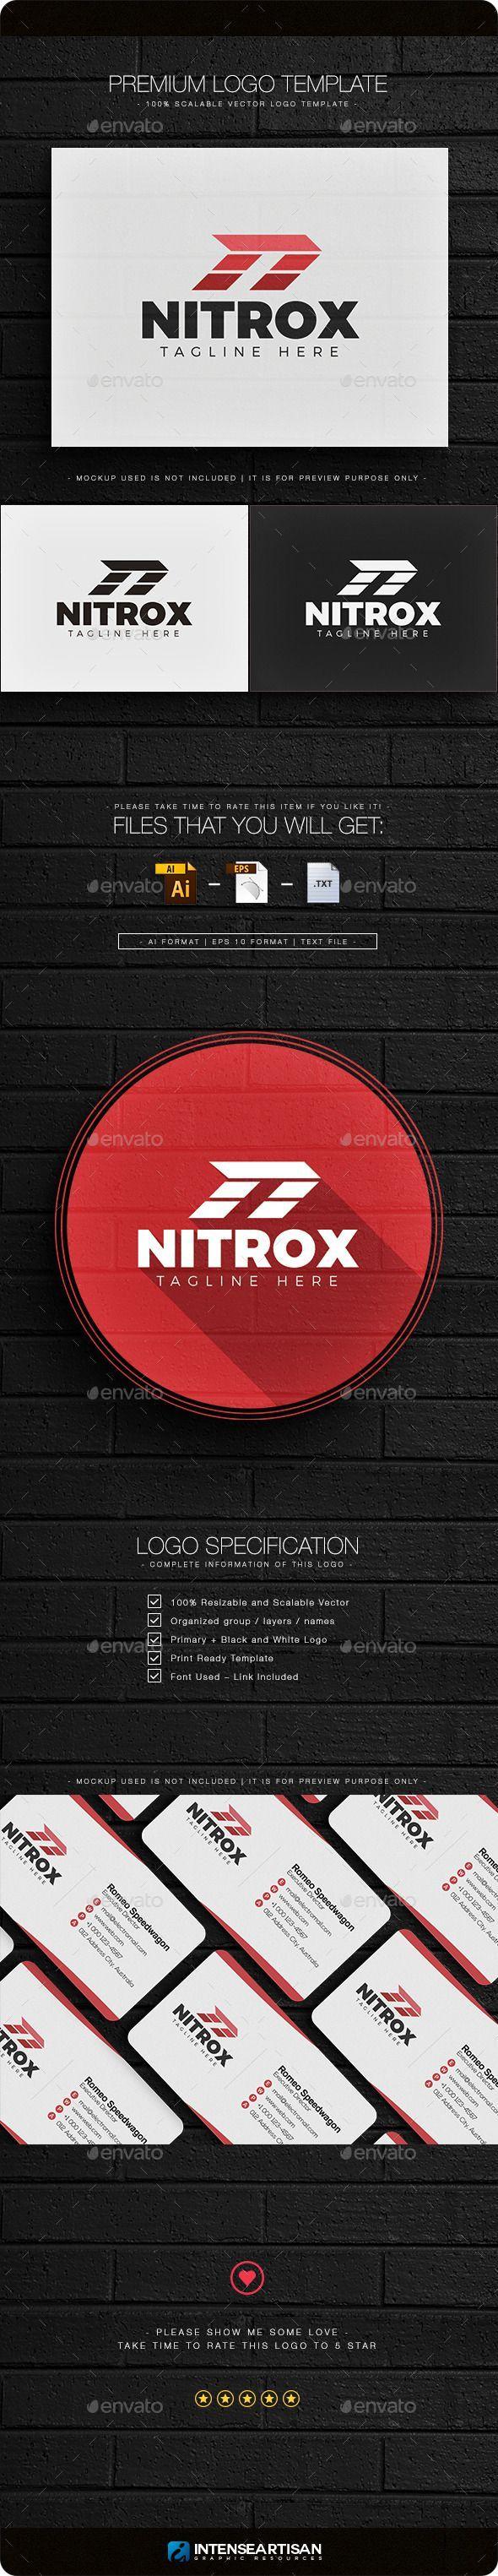 Only with Red N Logo - Nitrox - Letter N Logo | Fonts-logos-icons | Logo templates, Logos ...